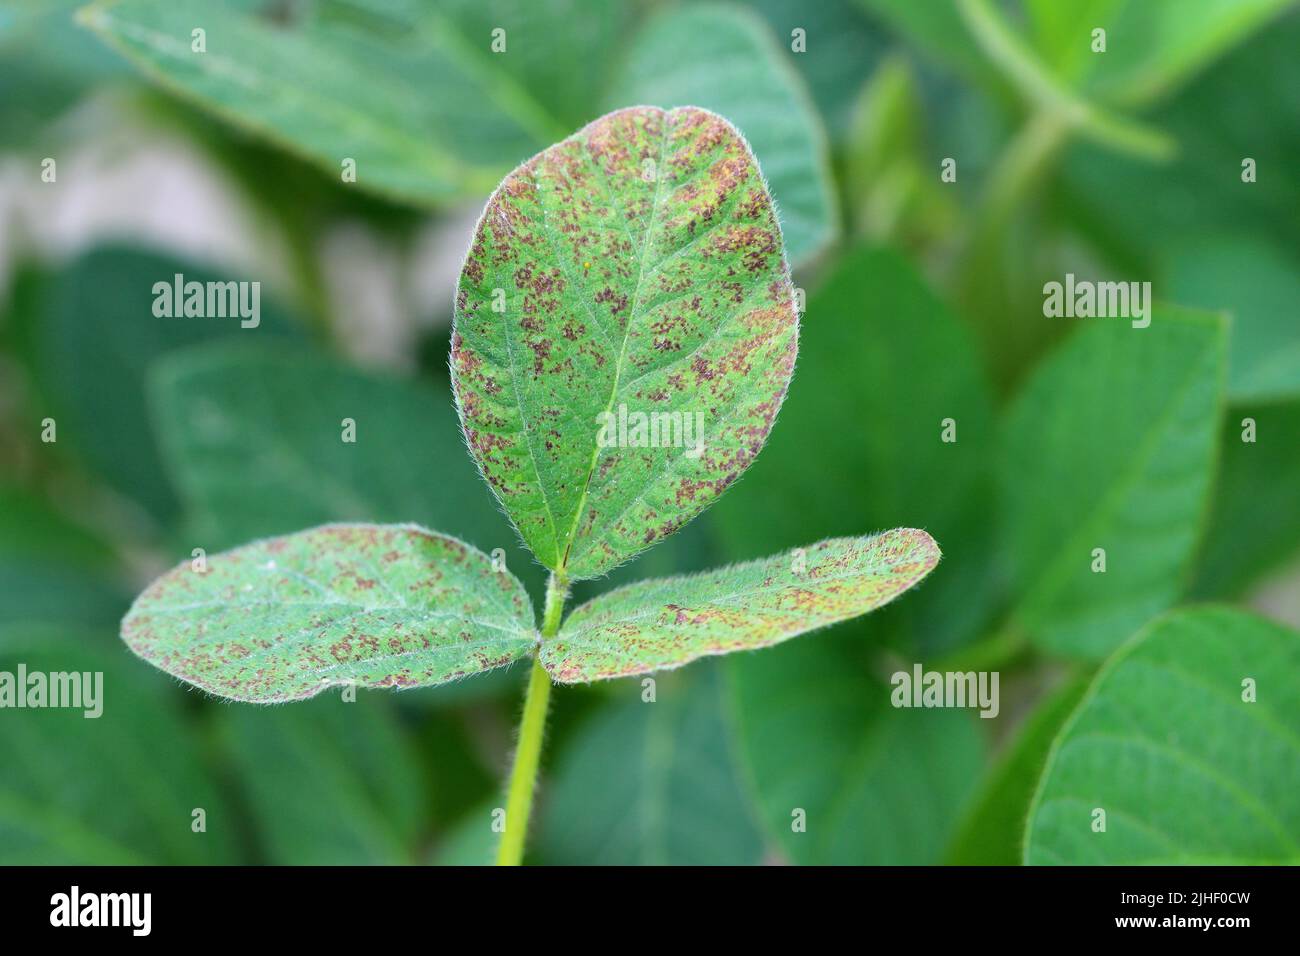 Asian soybean rust (Phakopsora pachyrizi) pustules on the under surface of a soybean leaf Stock Photo